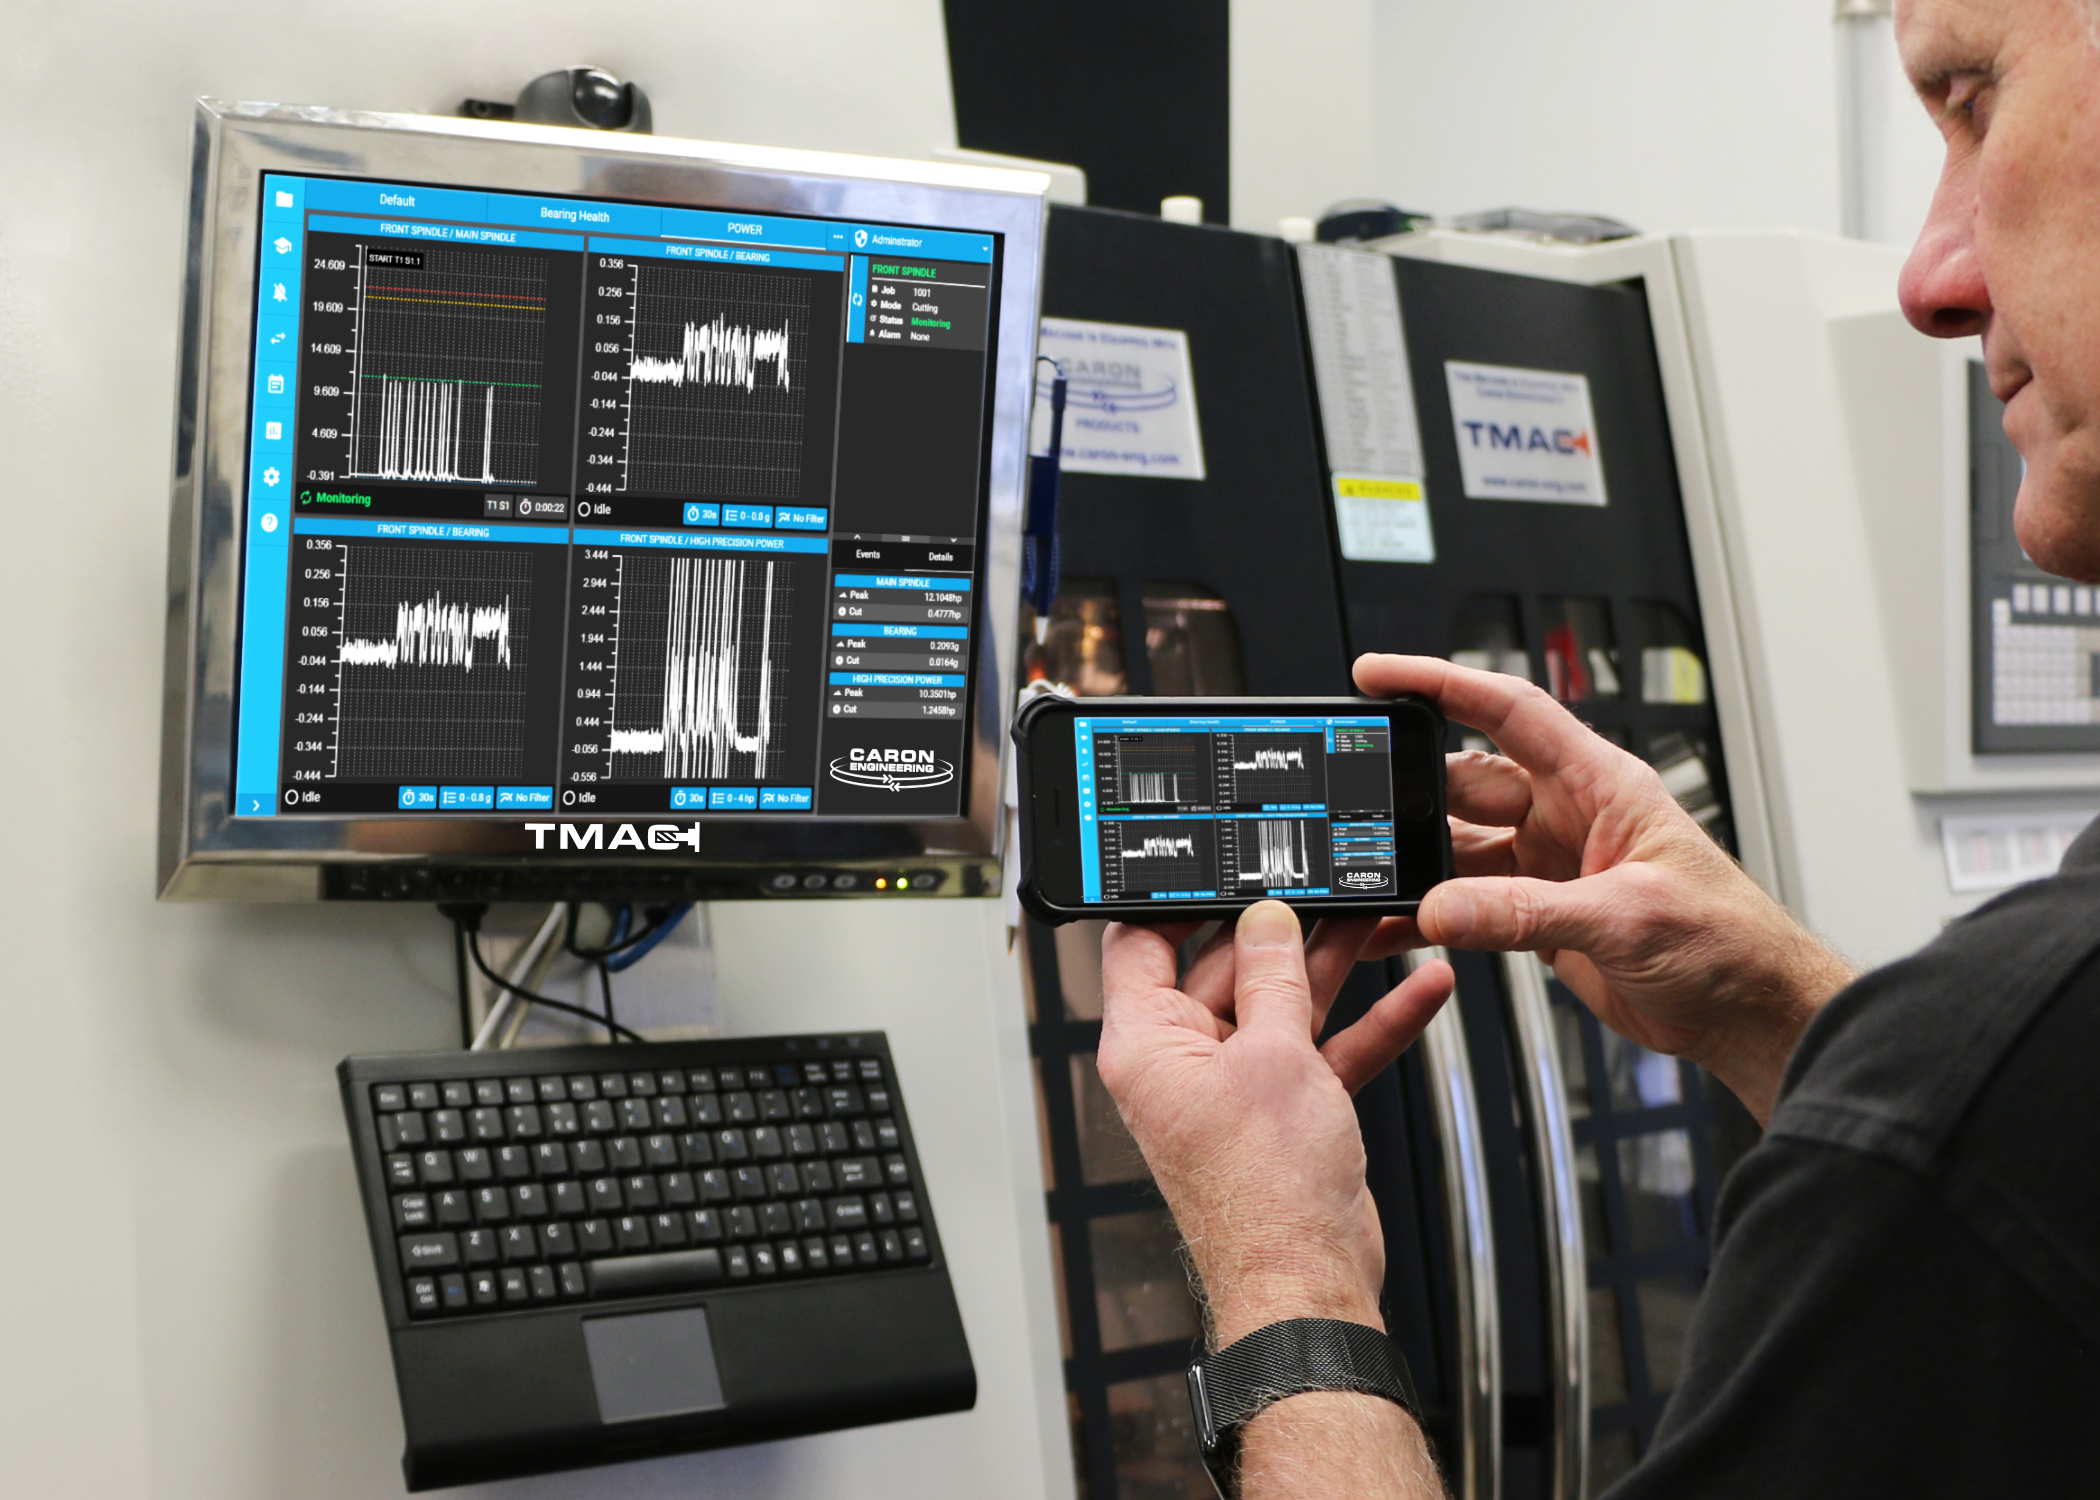 The TMAC system can monitor multiple sensor channels simultaneously and from any network-connected device, including smartphones. Photo credit: Caron Engineering